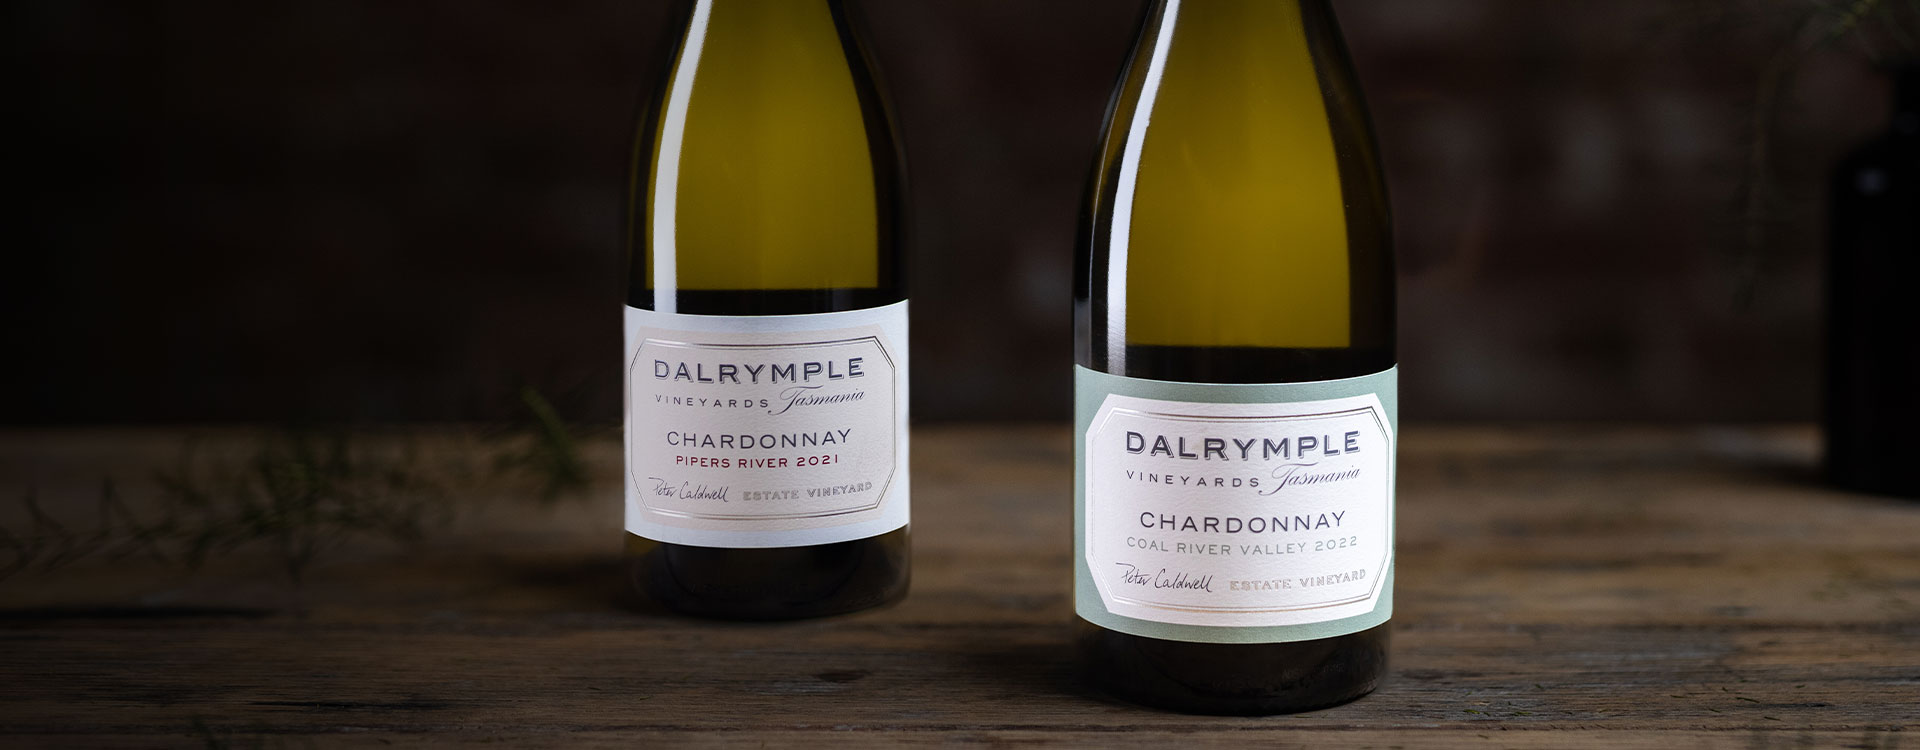 Dalrymple and Prohibition Food & Wine, a perfect pairing